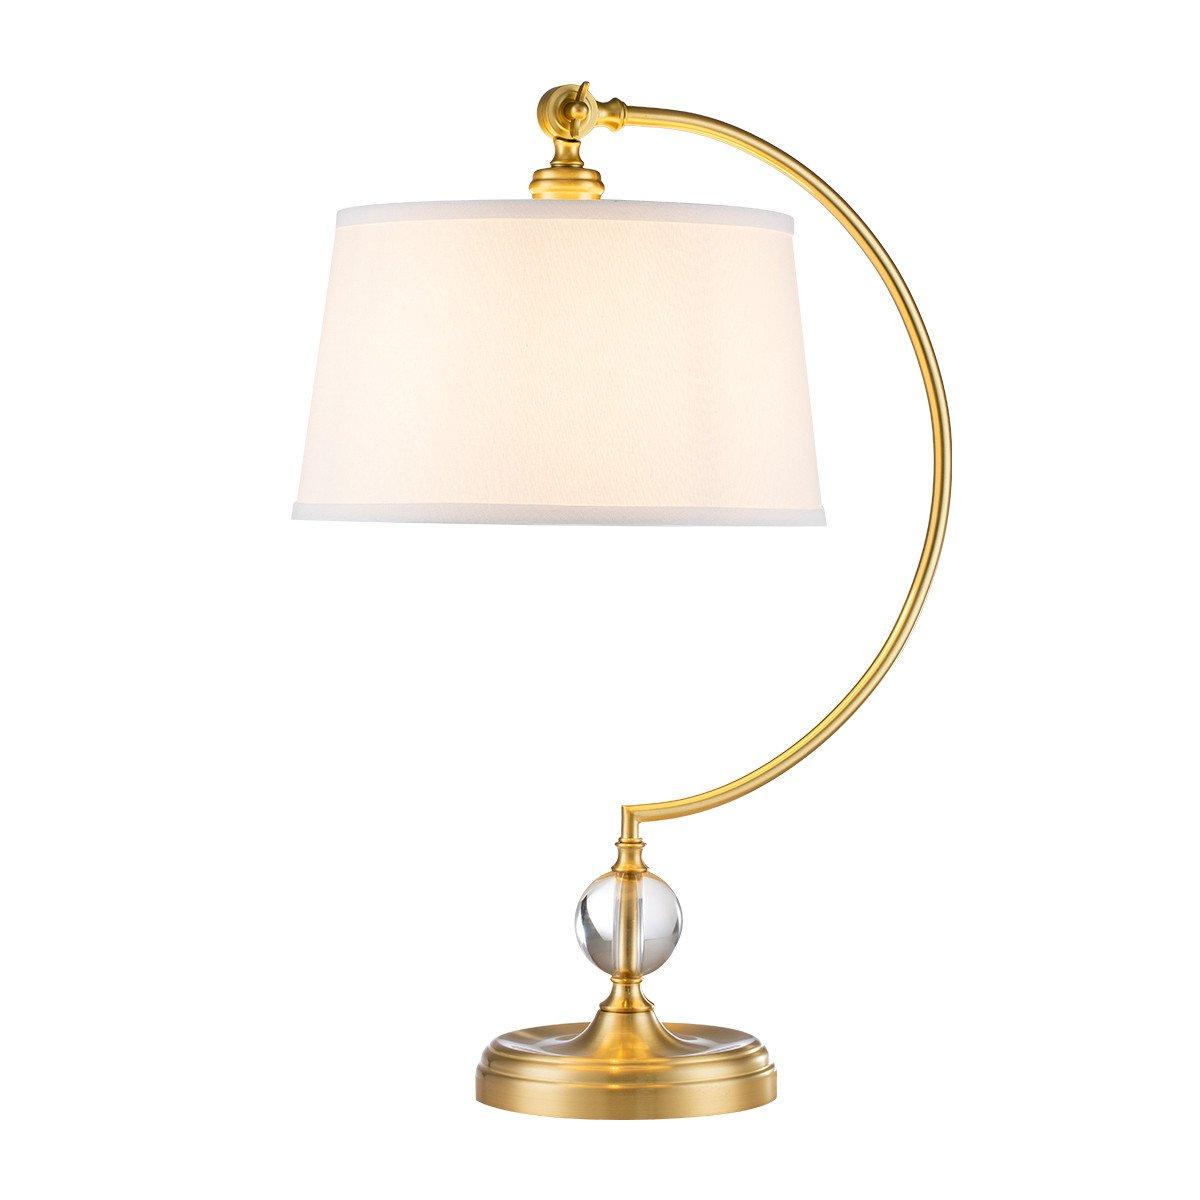 Quoizel Jenkins Table Lamp with Round Tapered Shade Brushed Brass